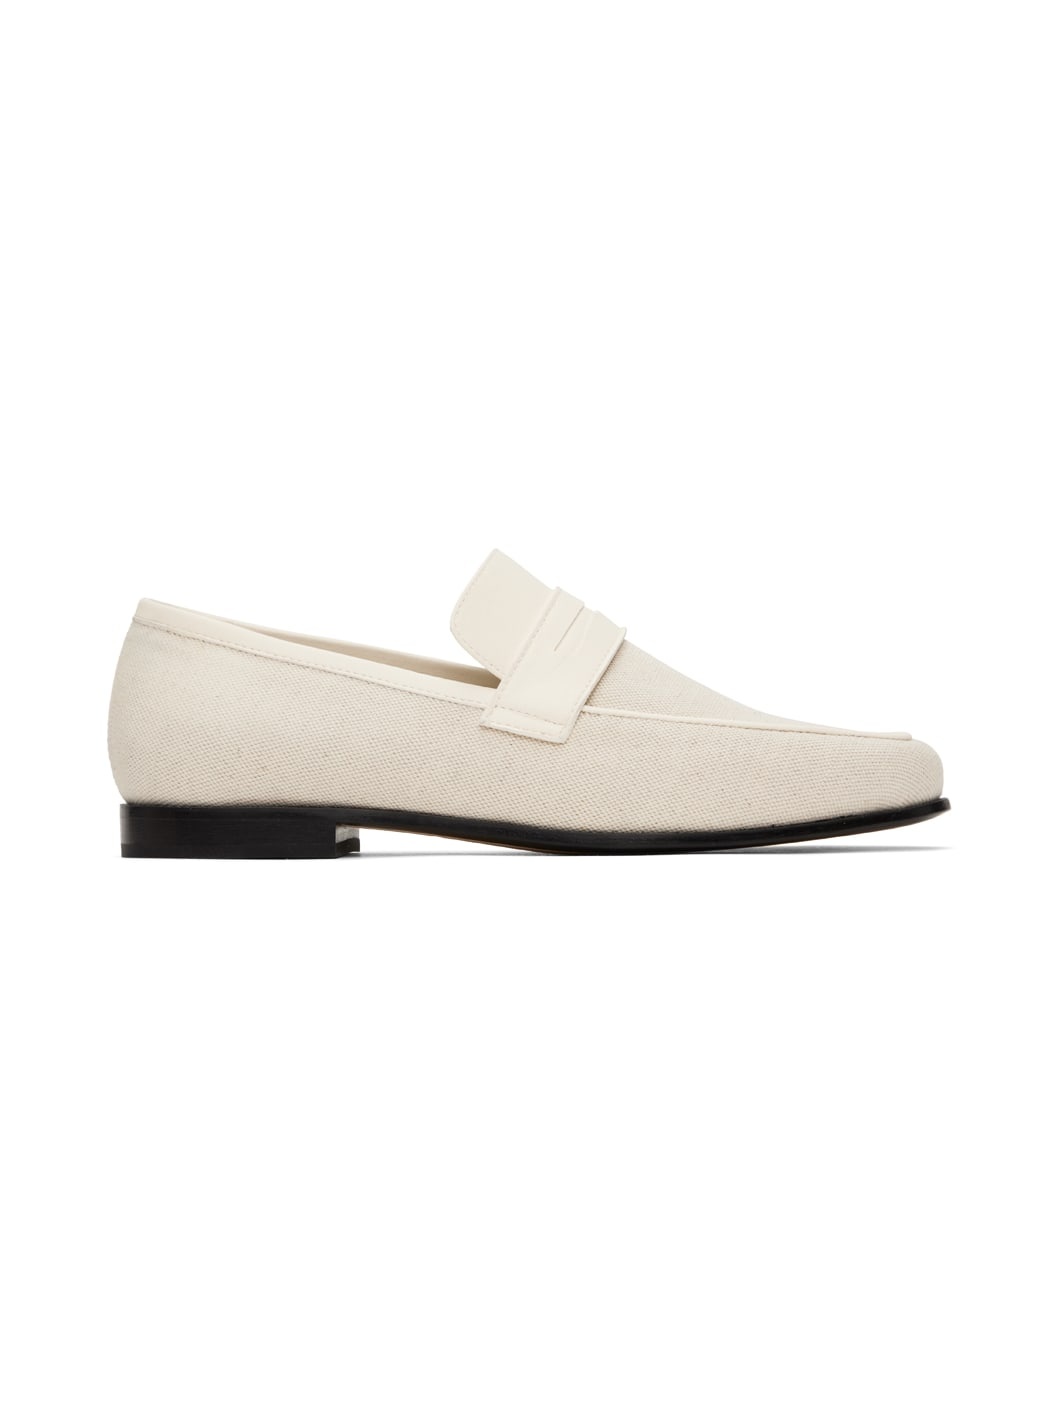 Off-White 'The Canvas' Penny Loafers - 1